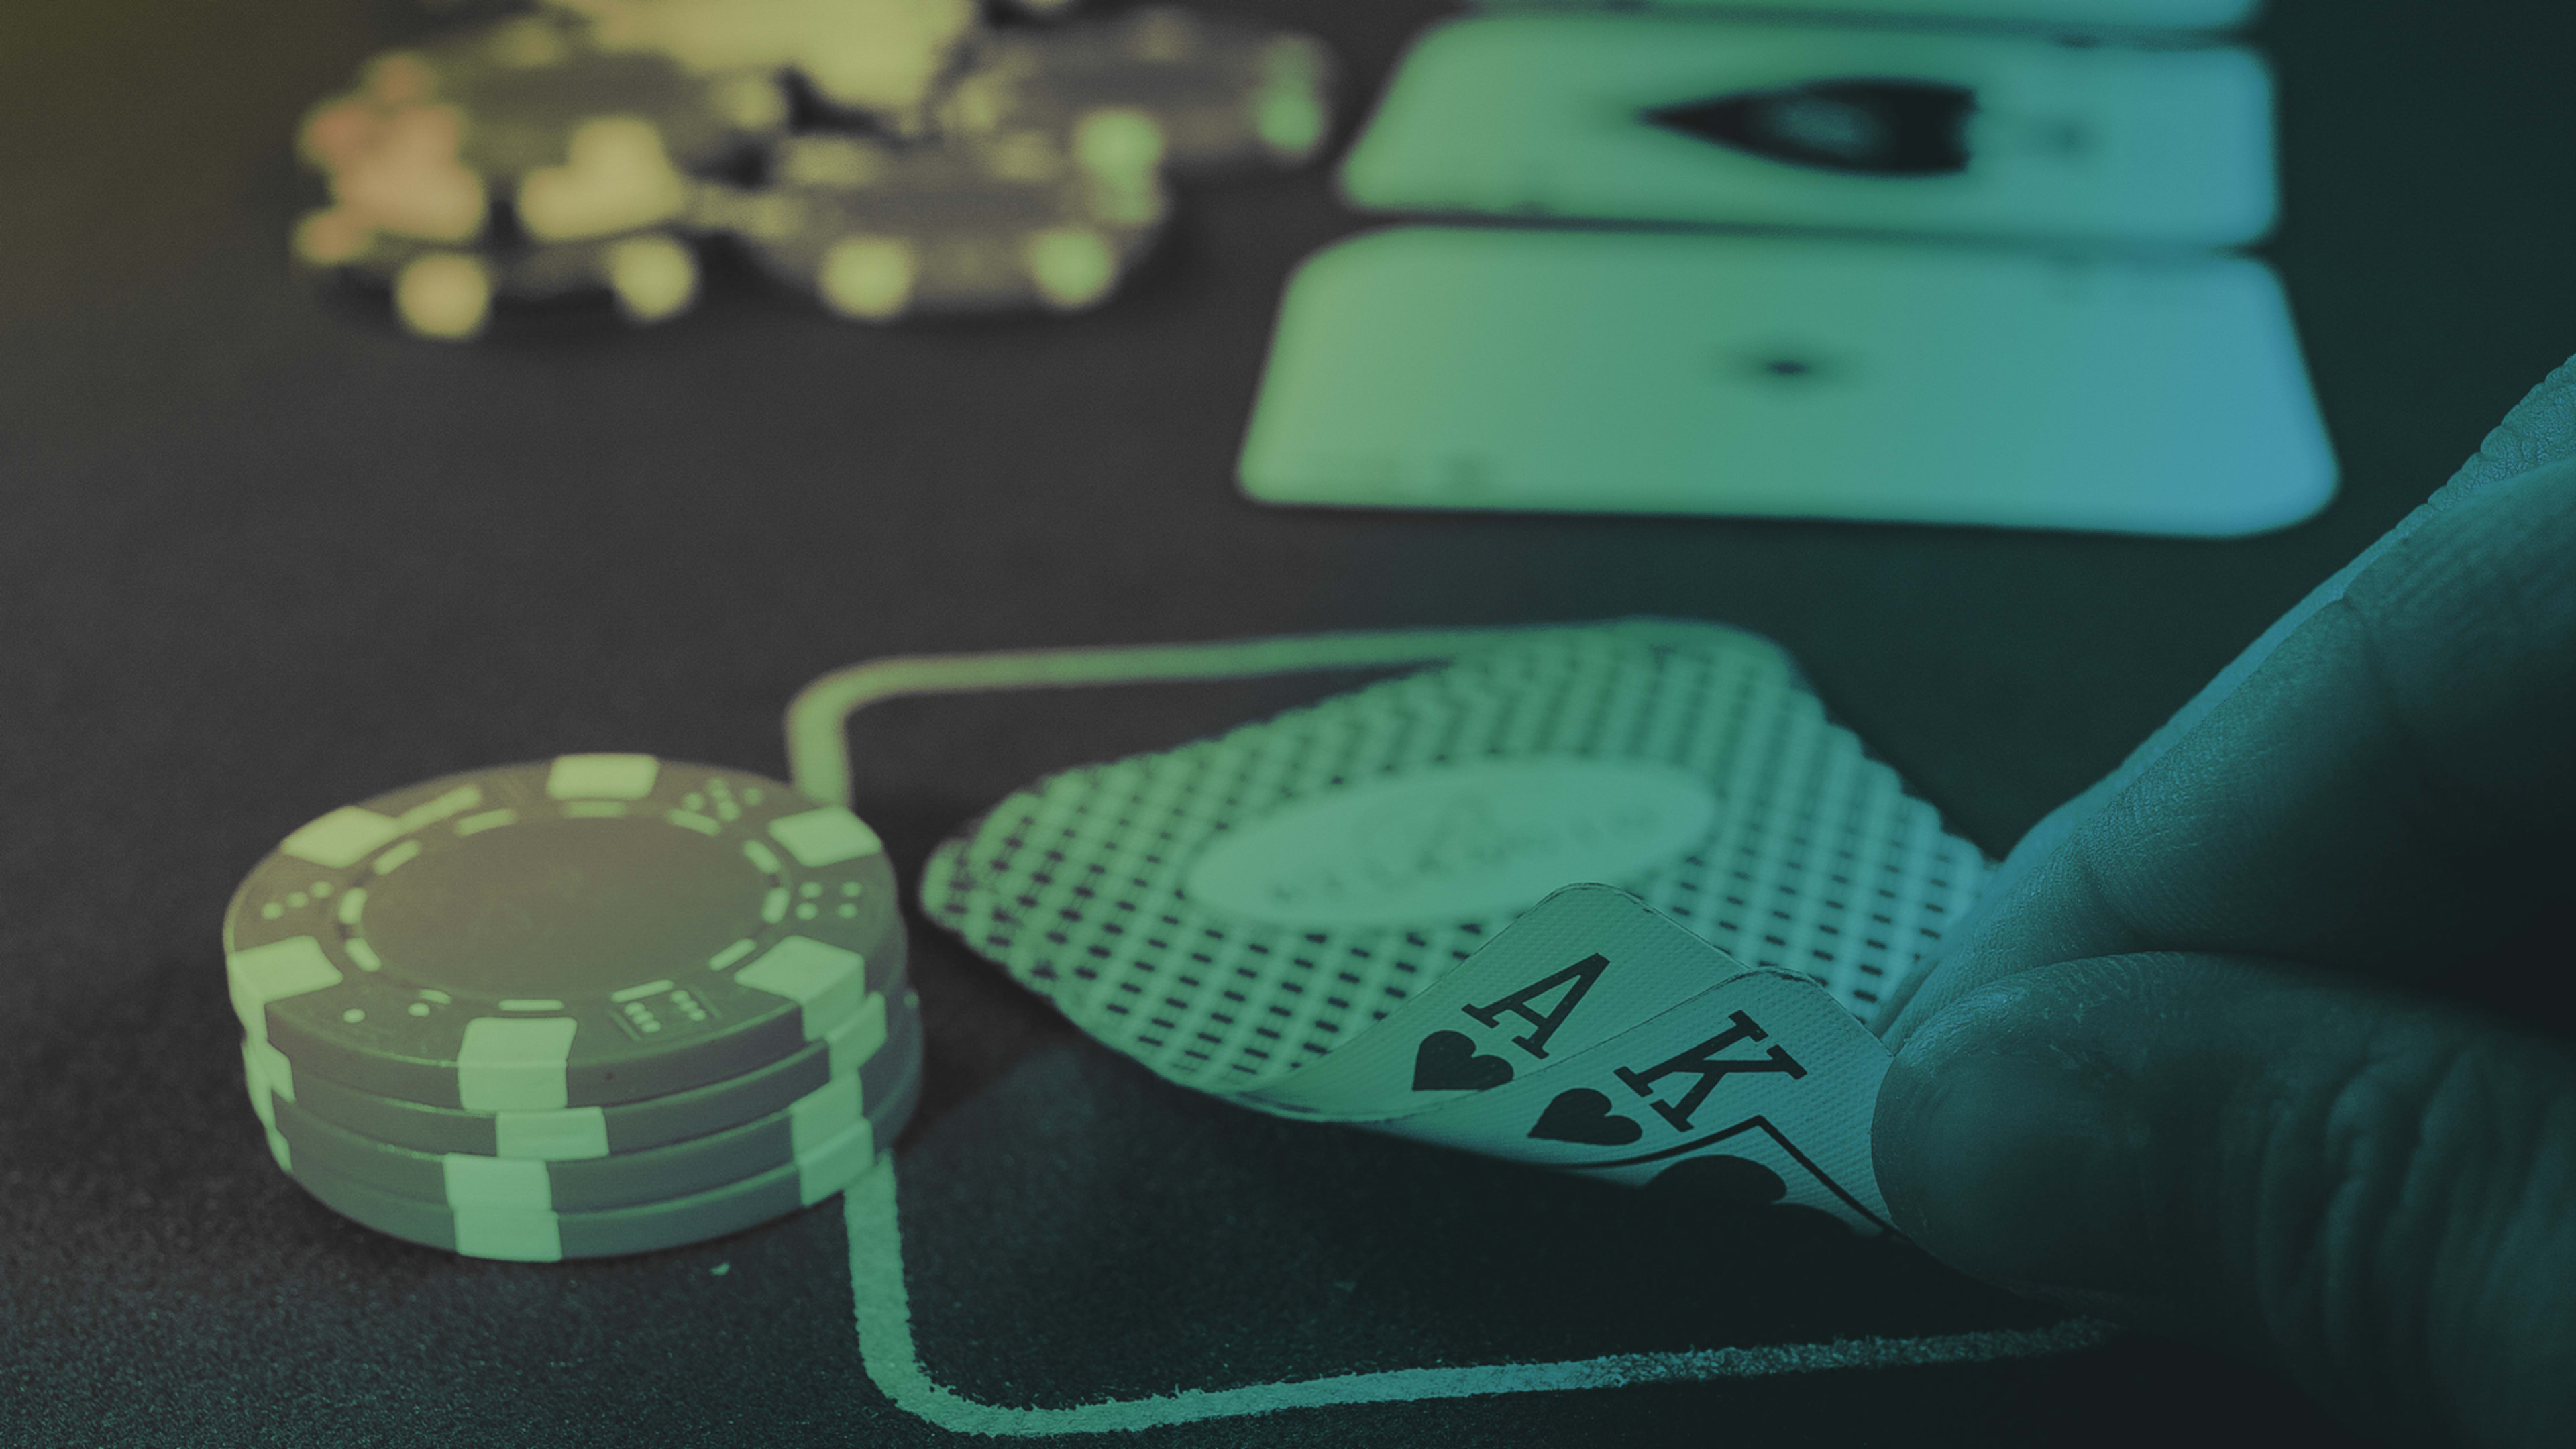 Even when it comes to Texas Hold’em, card sharks can’t outbluff the AI